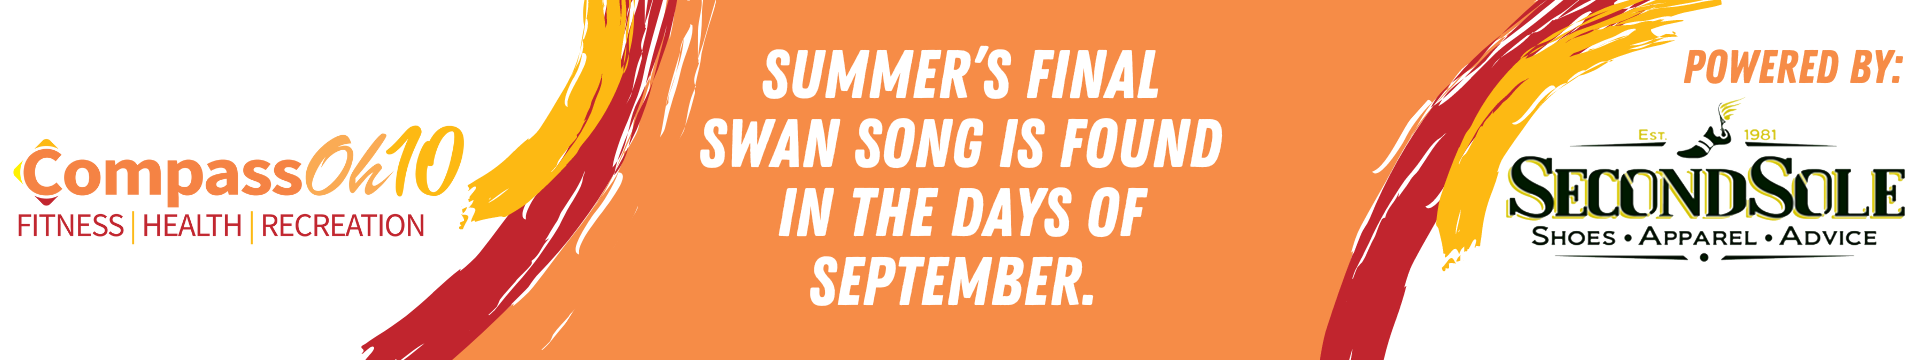 Summer’s Final Swan Song Is Found in the Days of September.